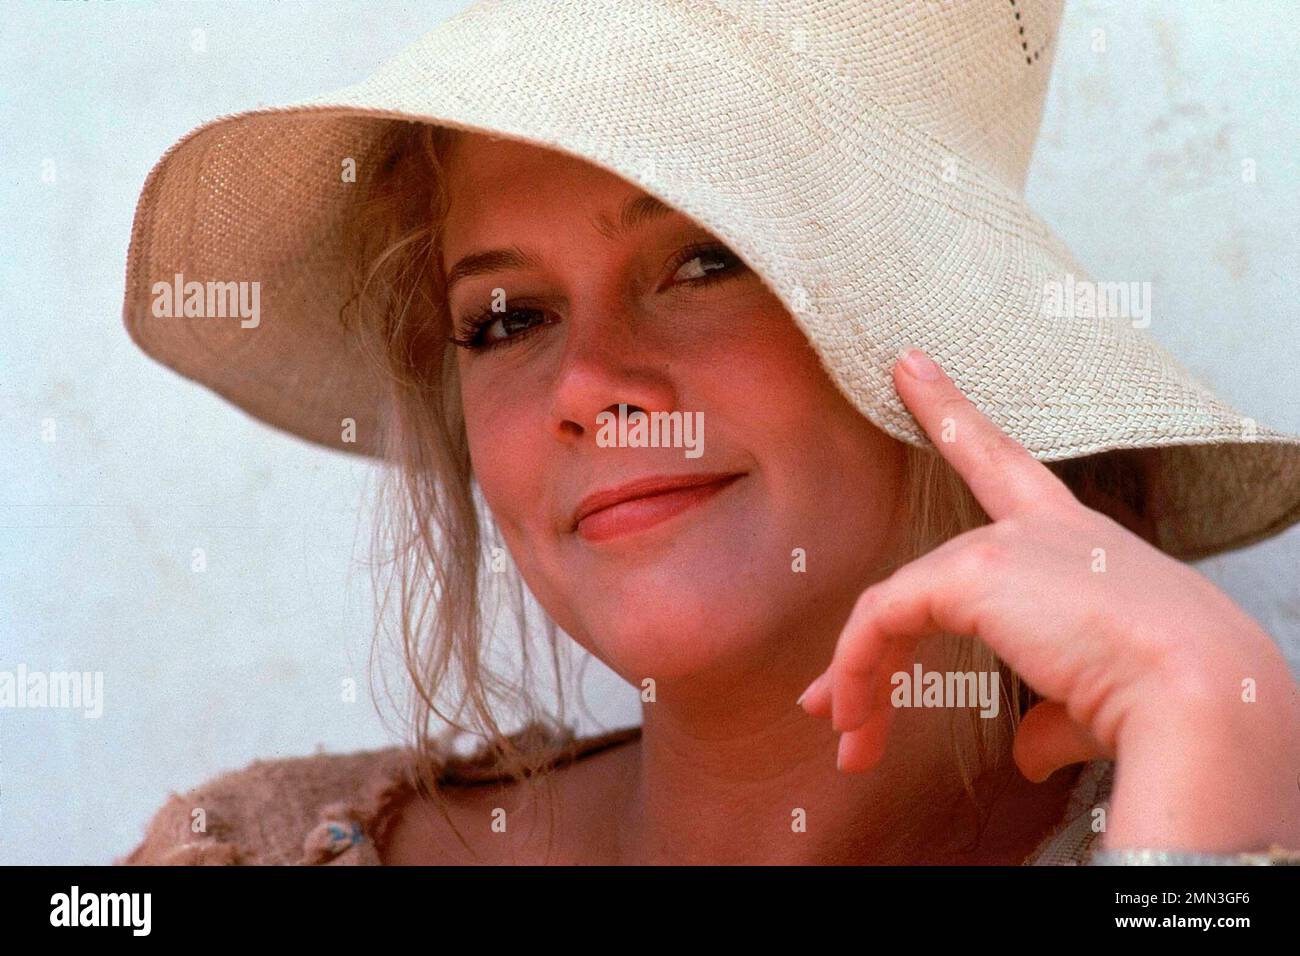 KATHLEEN TURNER in ROMANCING THE STONE (1984), directed by ROBERT ZEMECKIS. Credit: 20TH CENTURY FOX / Album Stock Photo